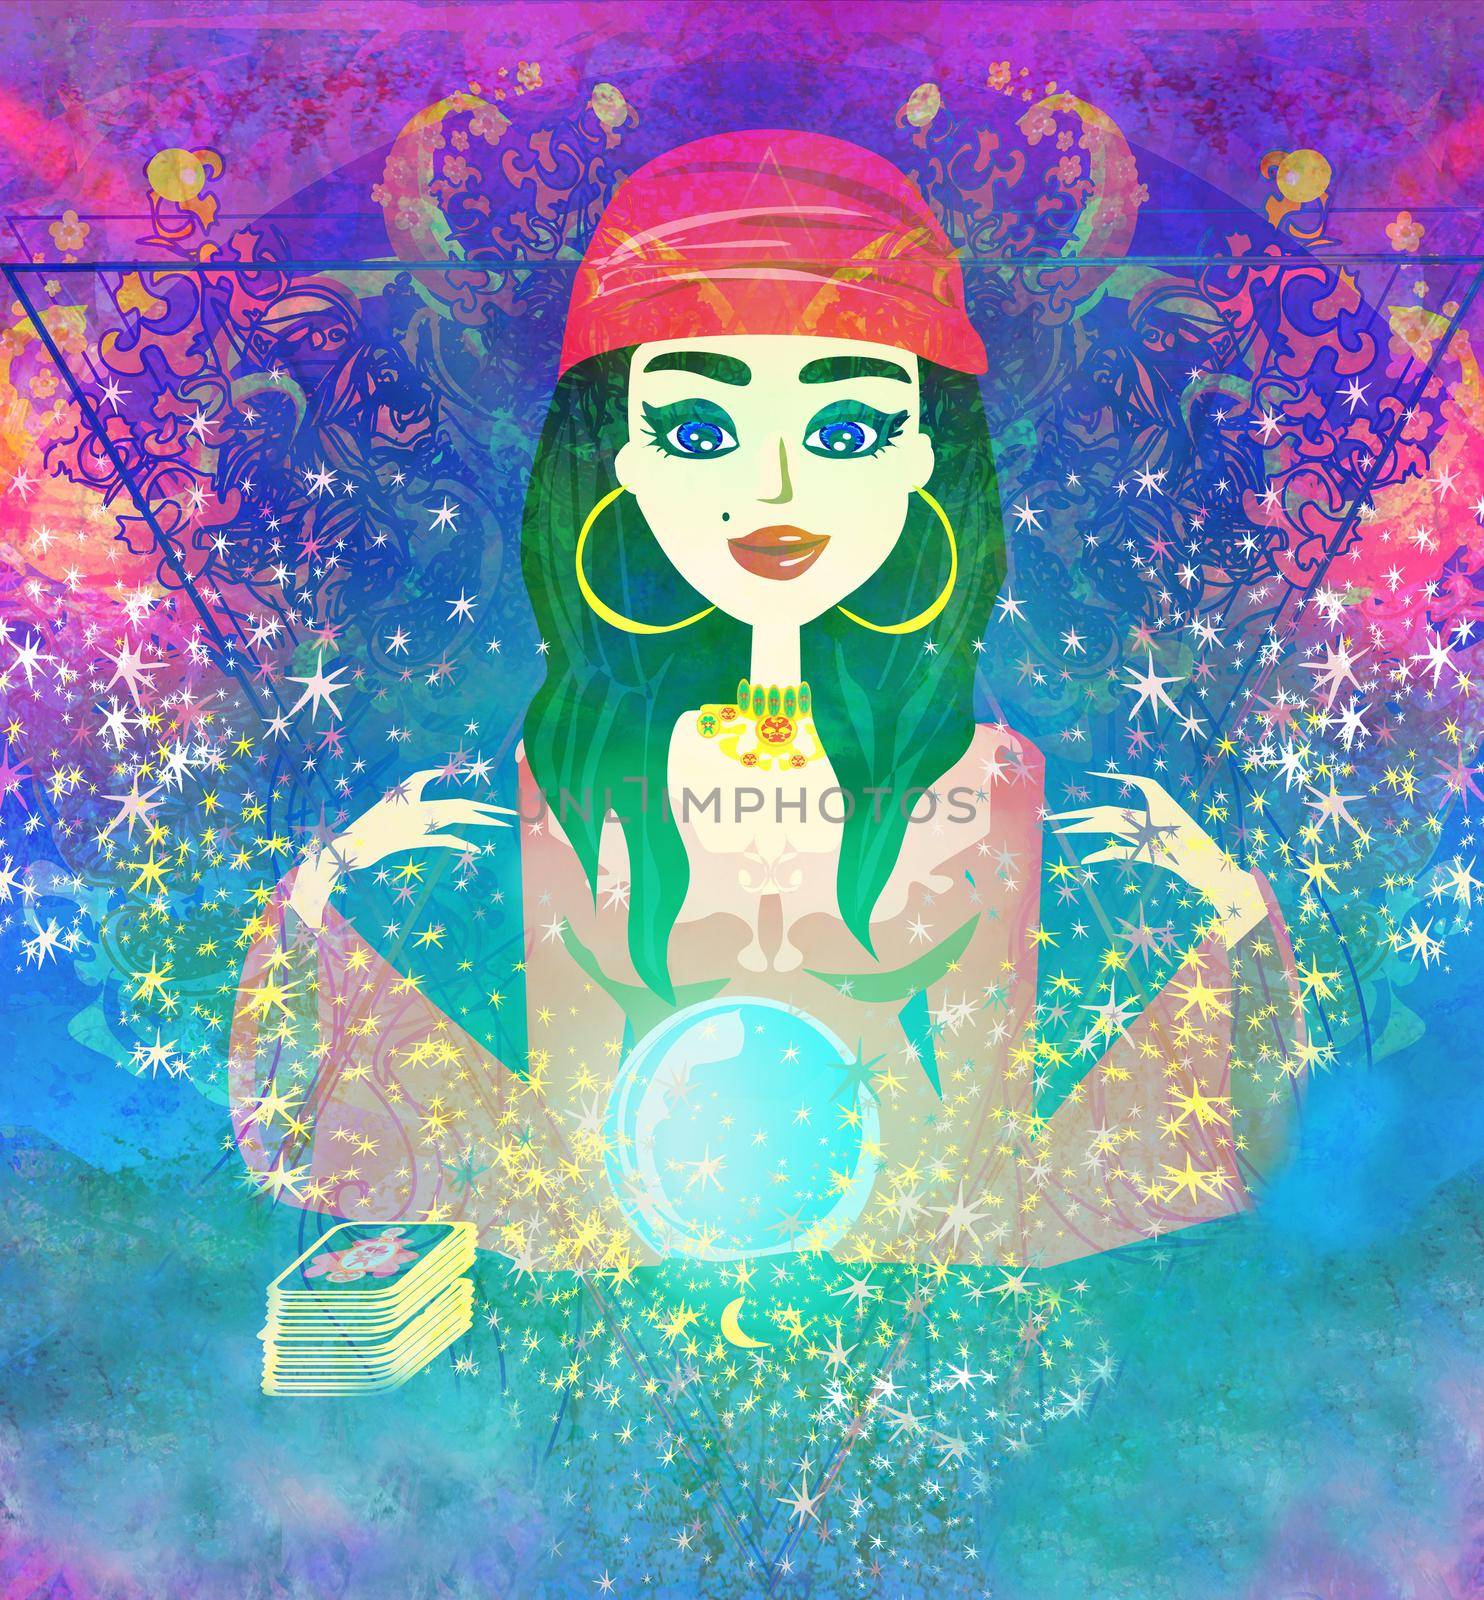 Fortune teller woman reading future on magical crystal ball by JackyBrown